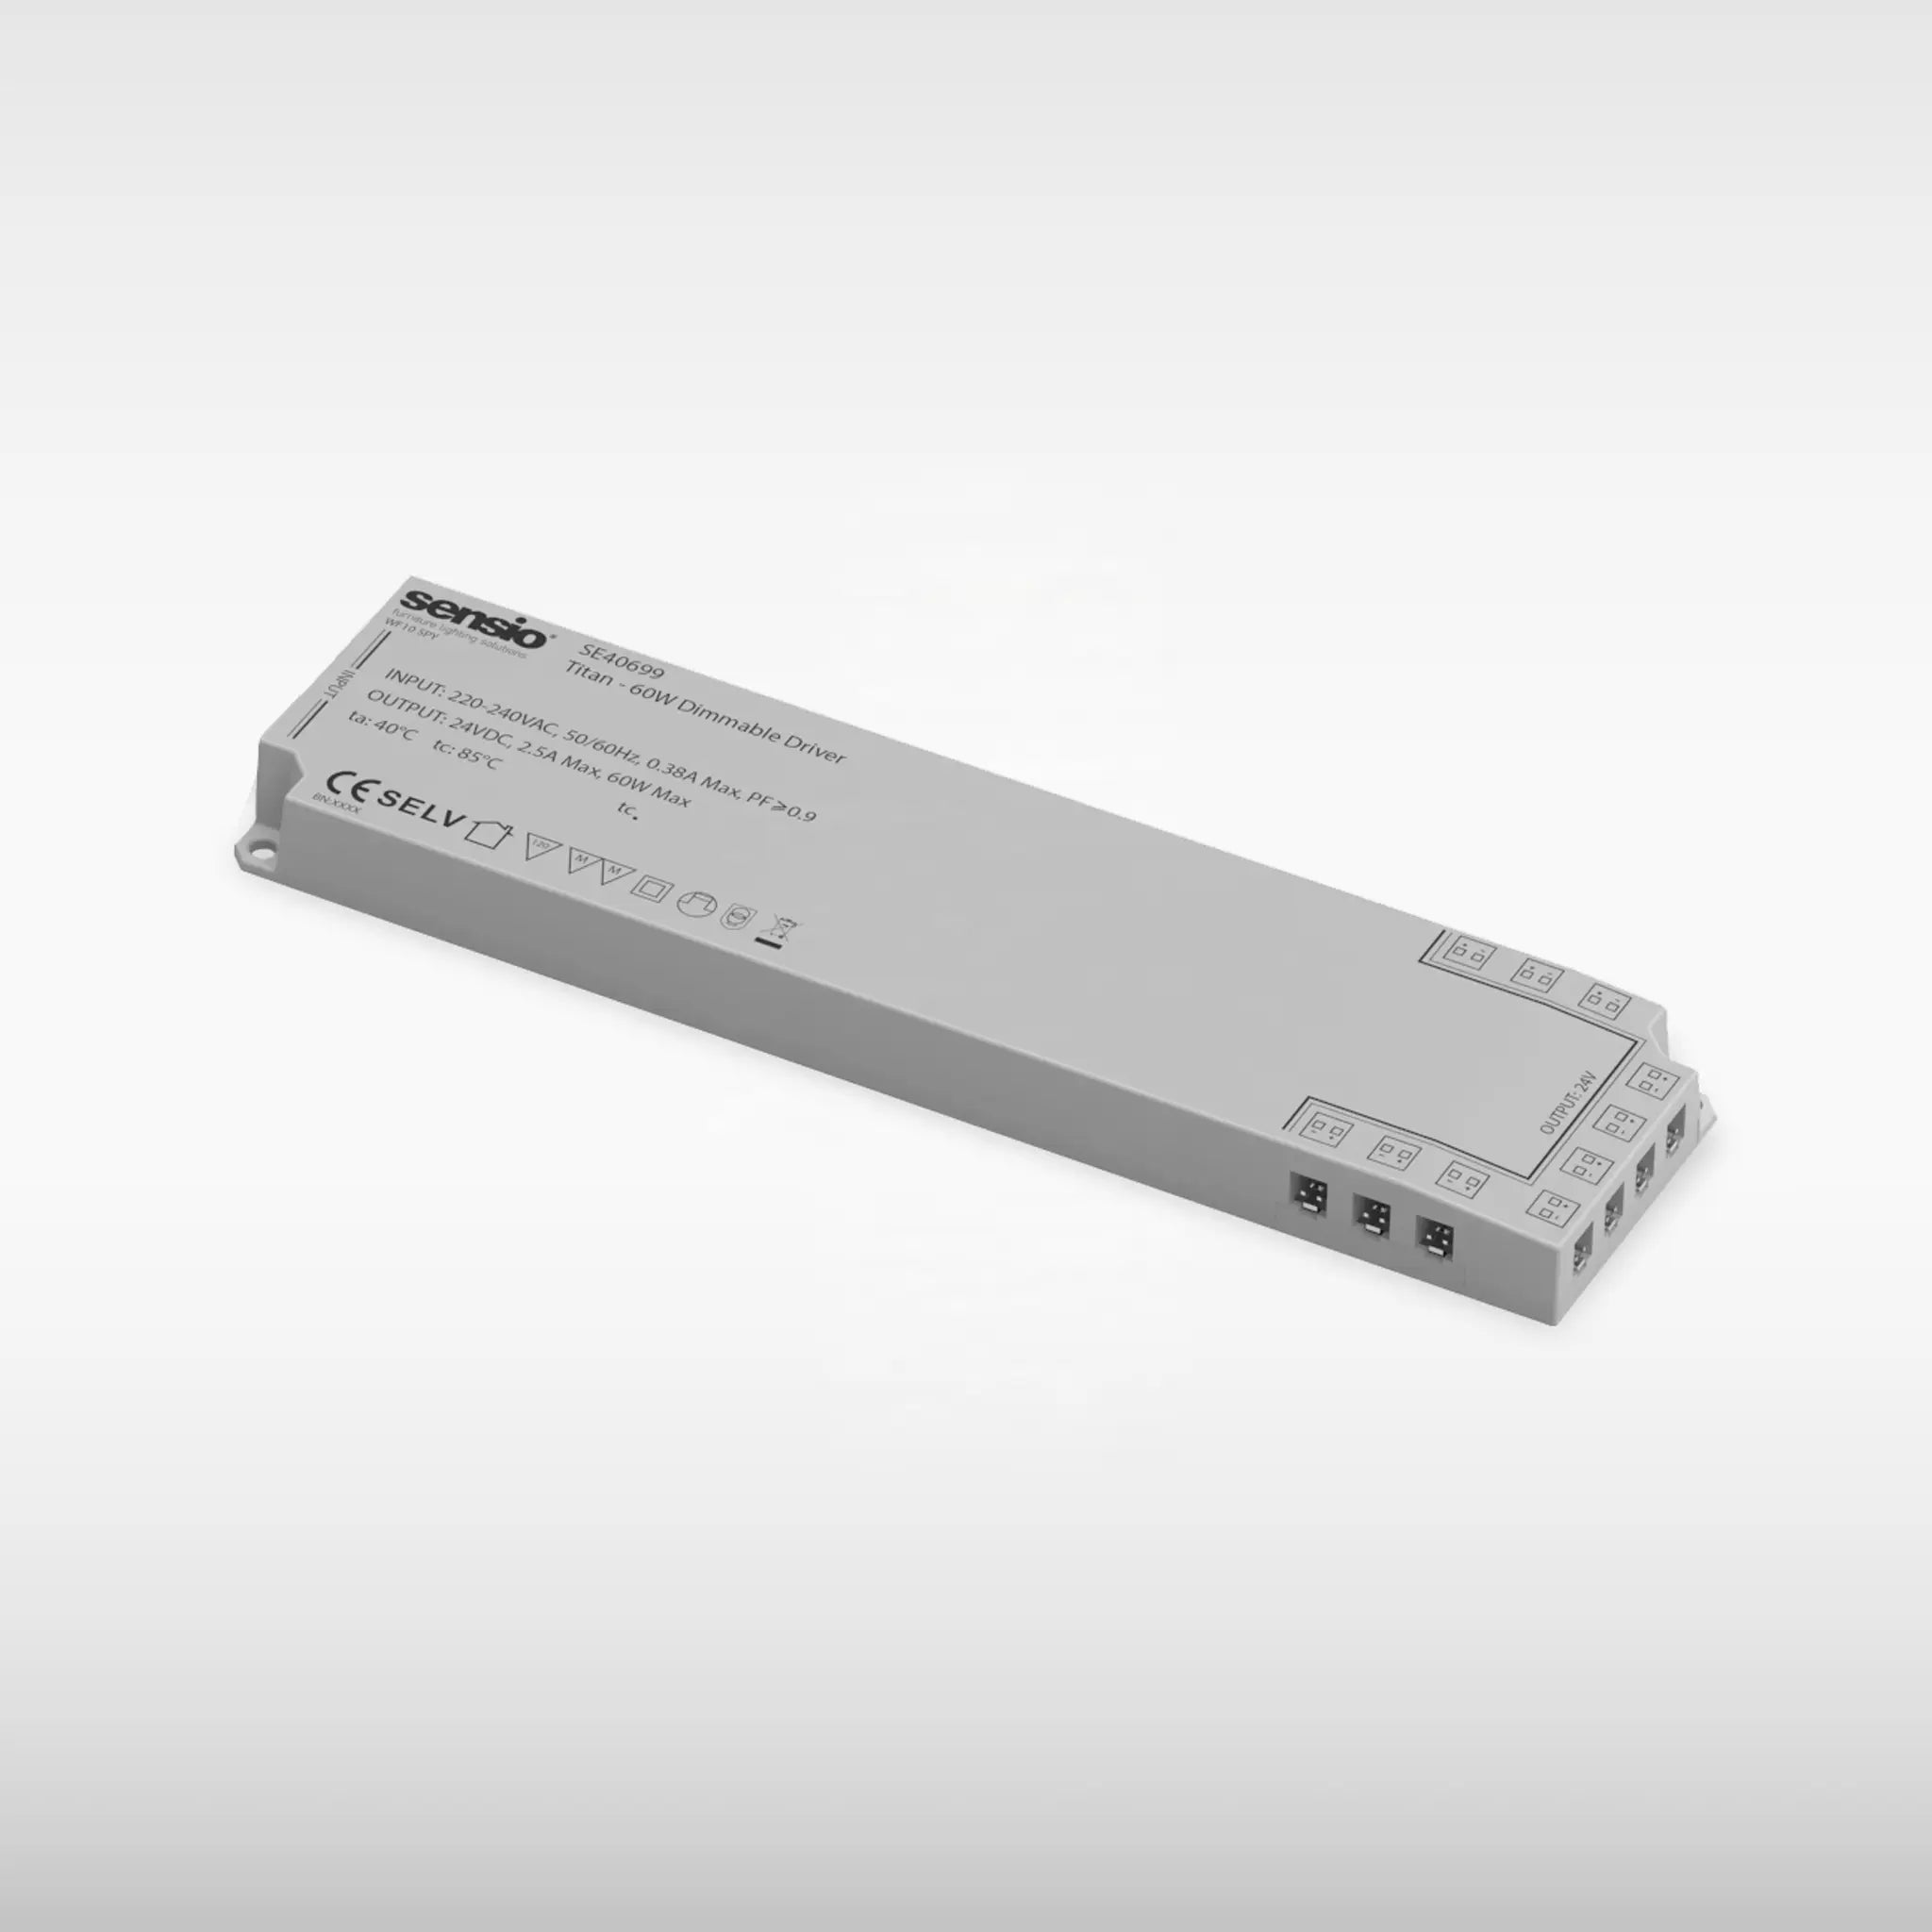 Titan Dimmable Driver